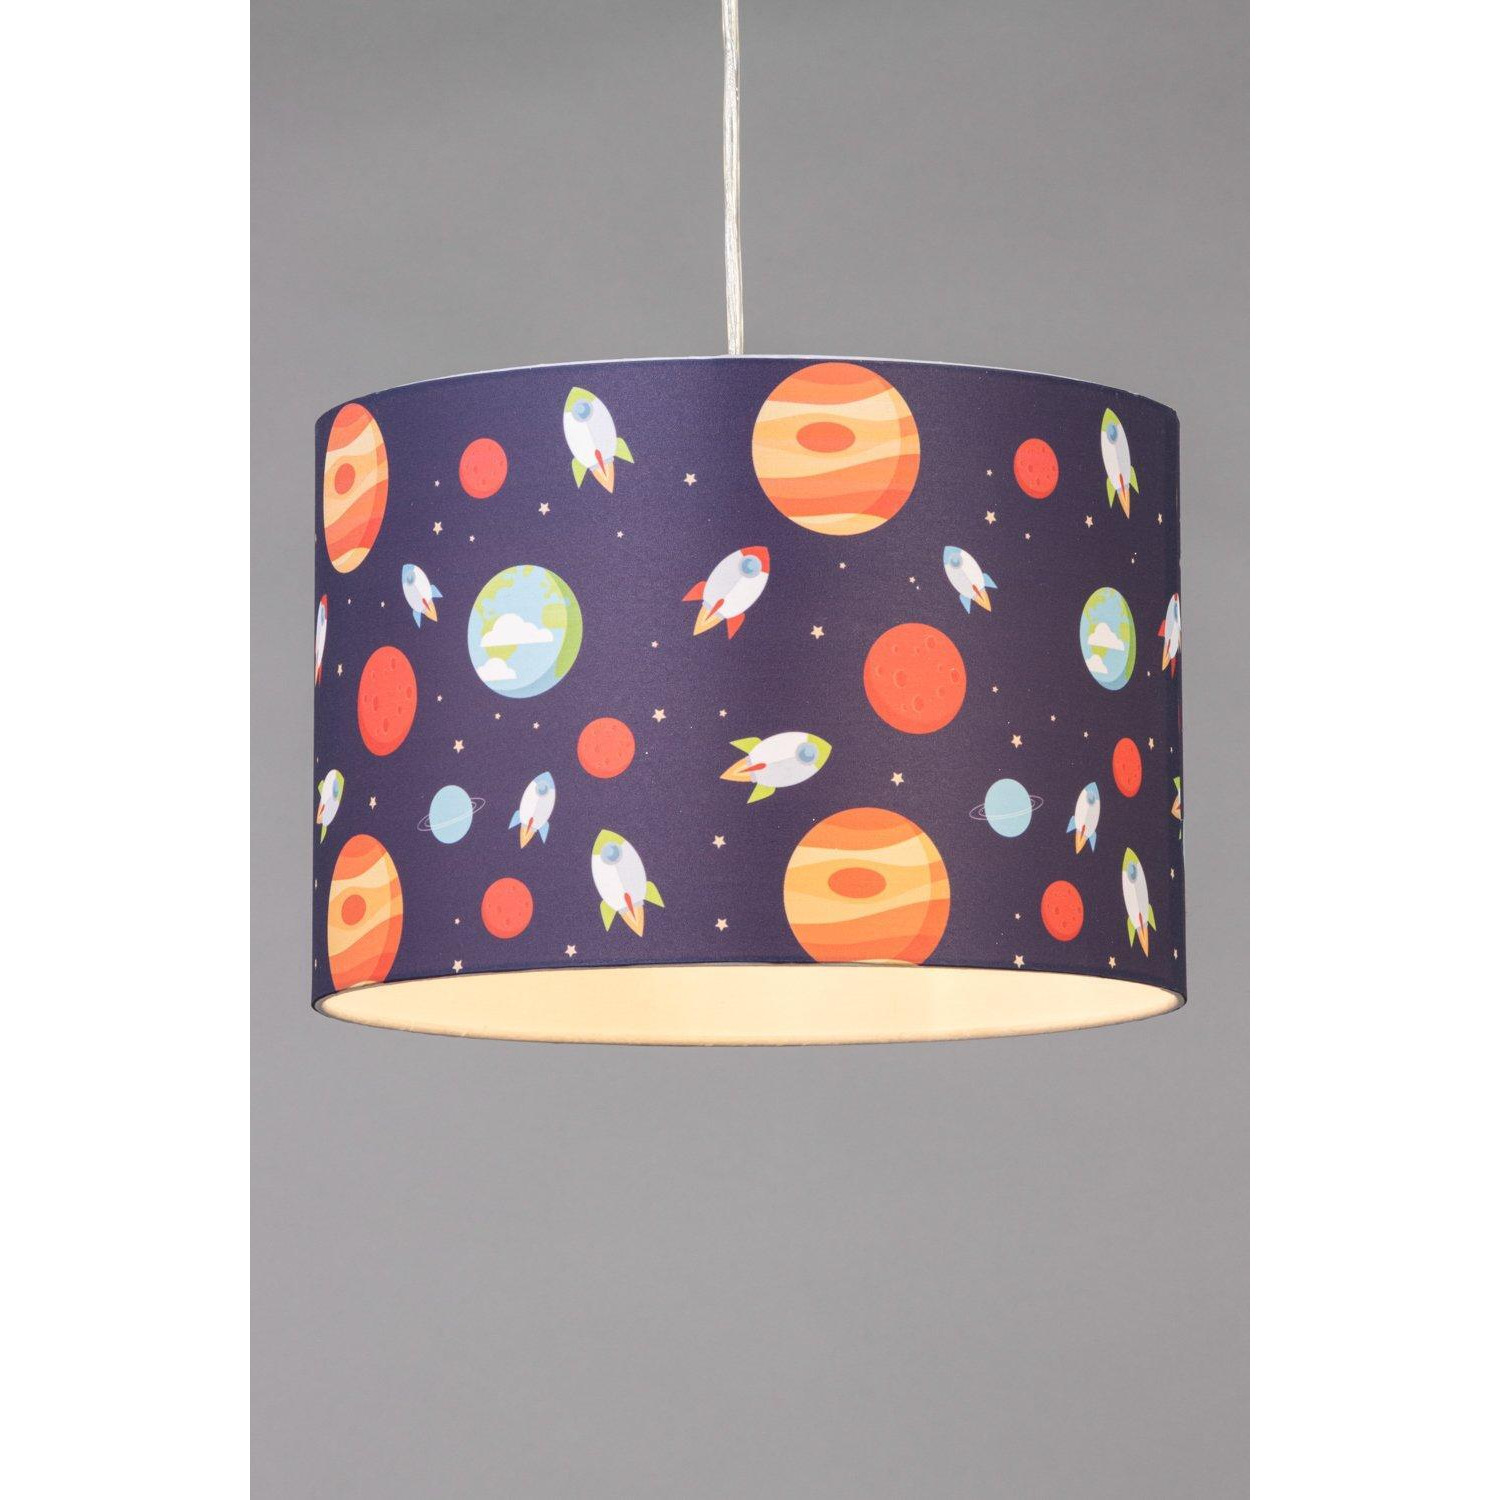 Glow Space Easy Fit Light Shade - image 1